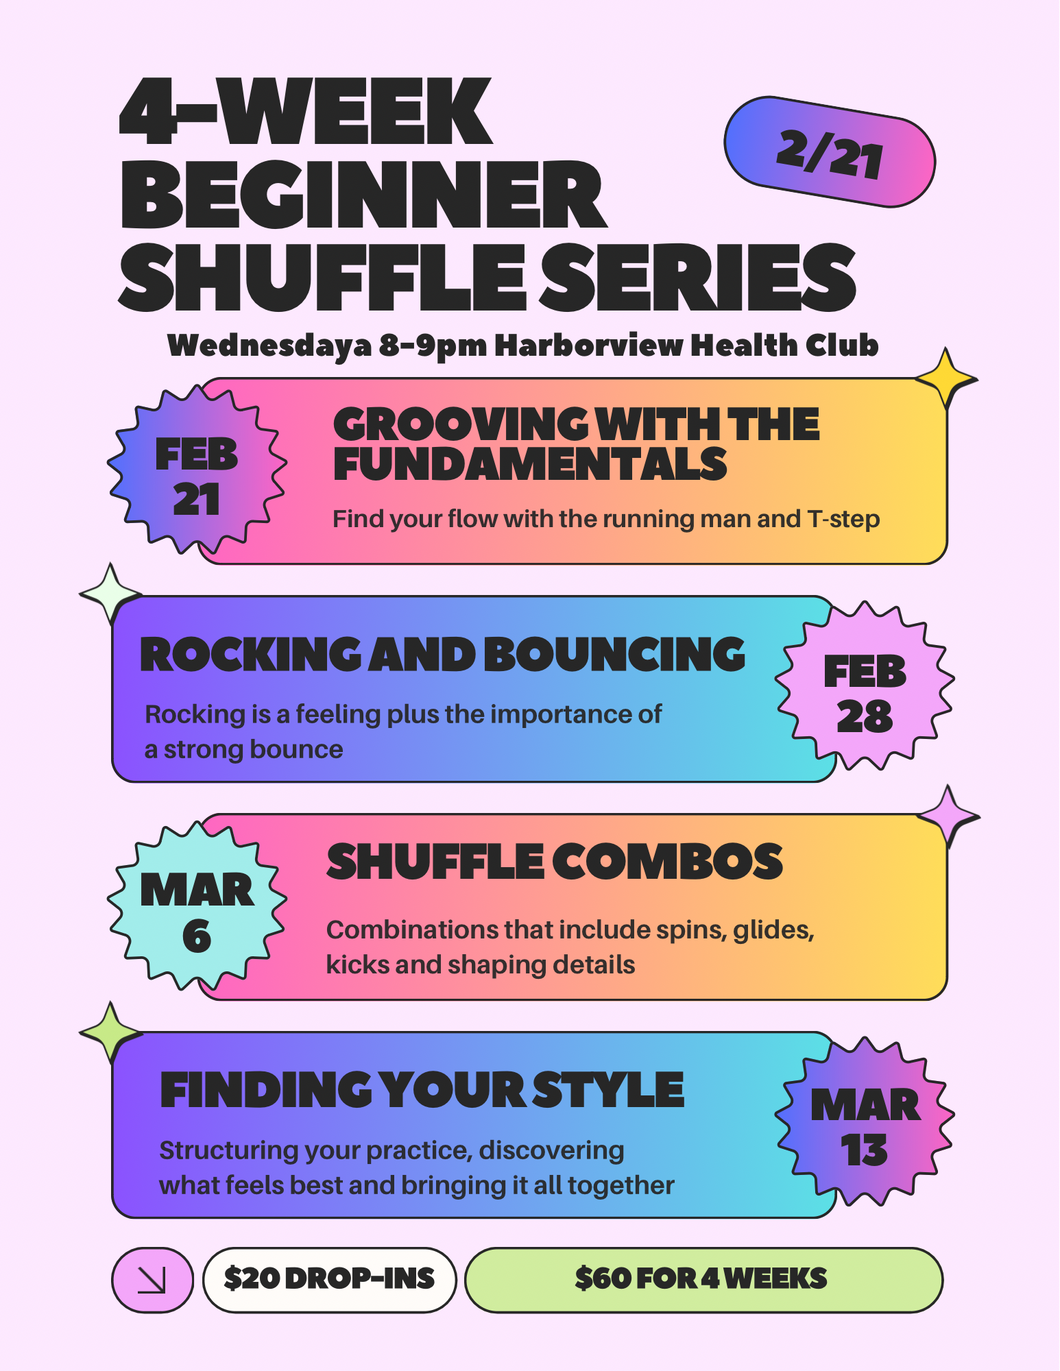 ONLY AVAILABLE FOR SELECTED STUDENTS - 4-Week Beginner Shuffle Series Drop-in $20